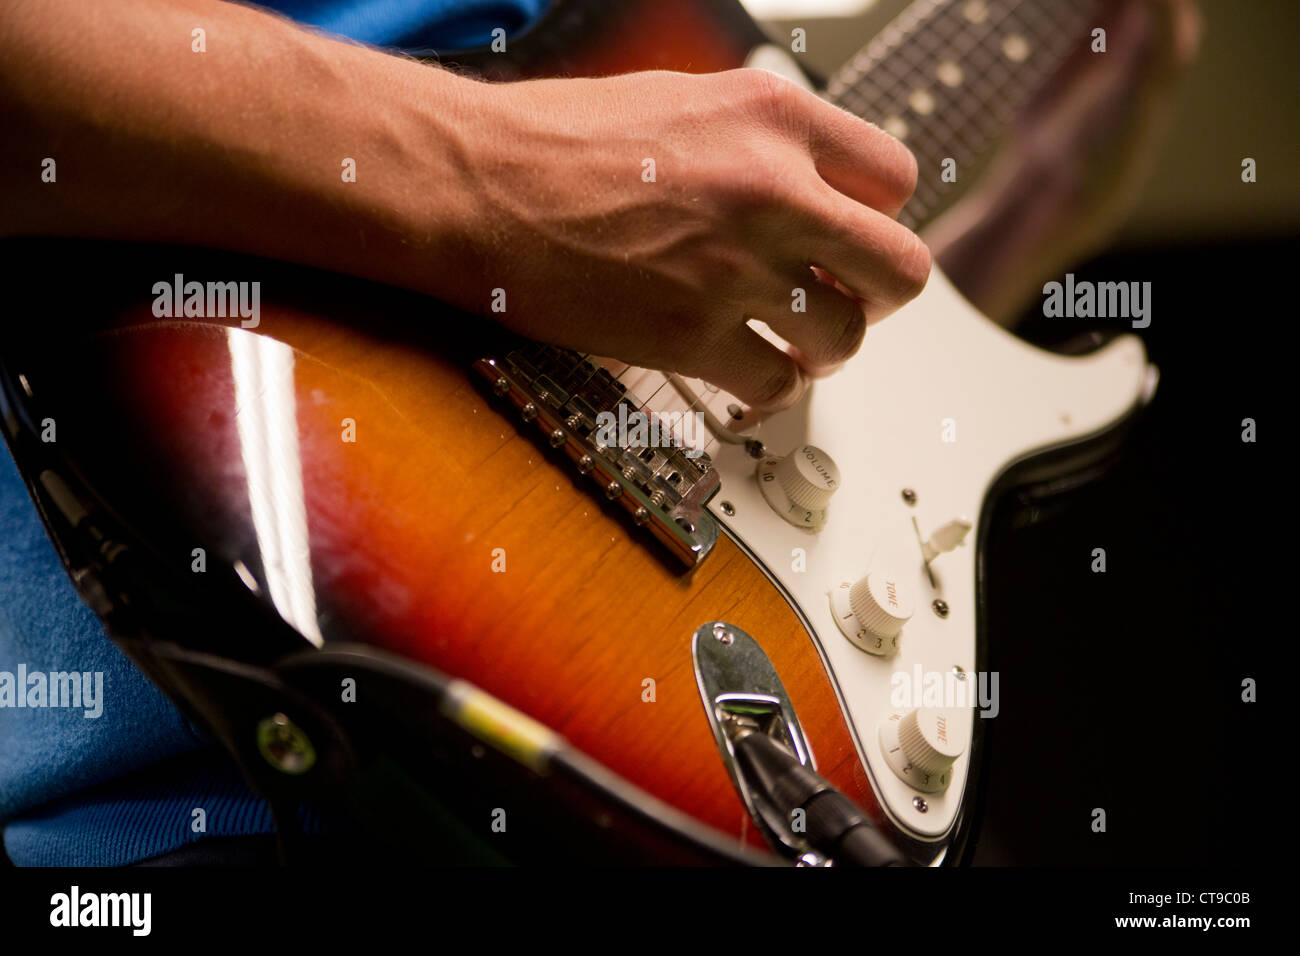 Man play guitar with its long bony fingers Stock Photo